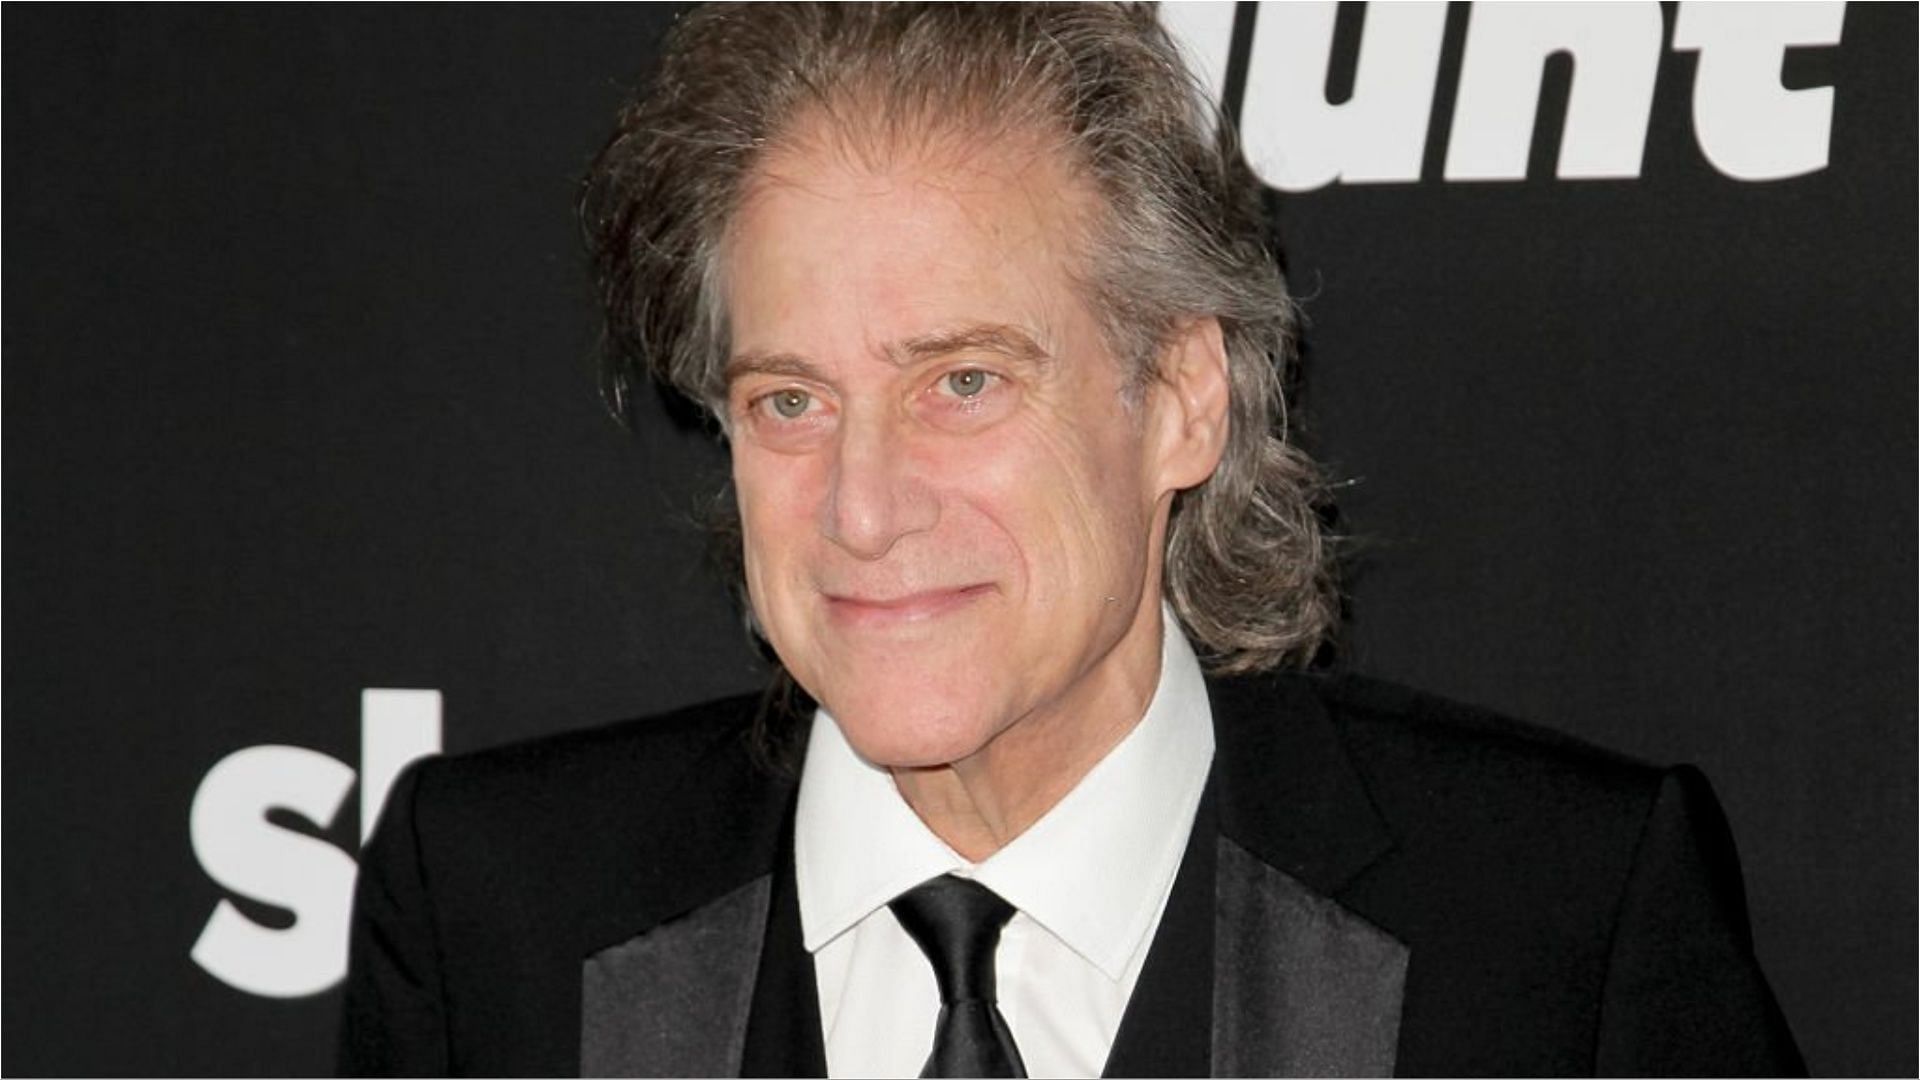 Richard Lewis has earned a lot from his flawless work in the entertainment industry (Image via Tibrina Hobson/Getty Images)